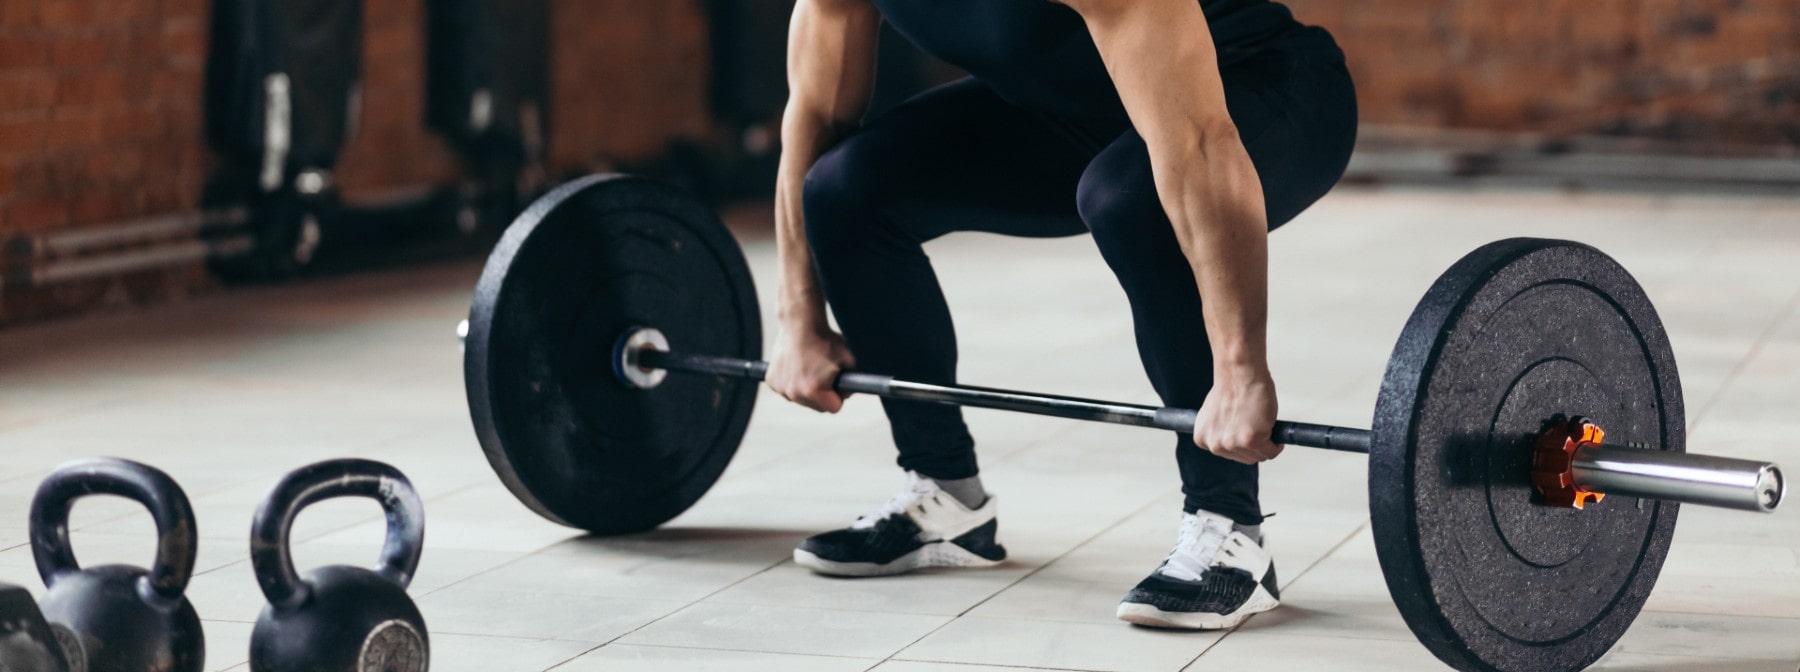 Deadlifts For Beginners | Mix Up & Master the Deadlift with these 7 Deadlift Variations